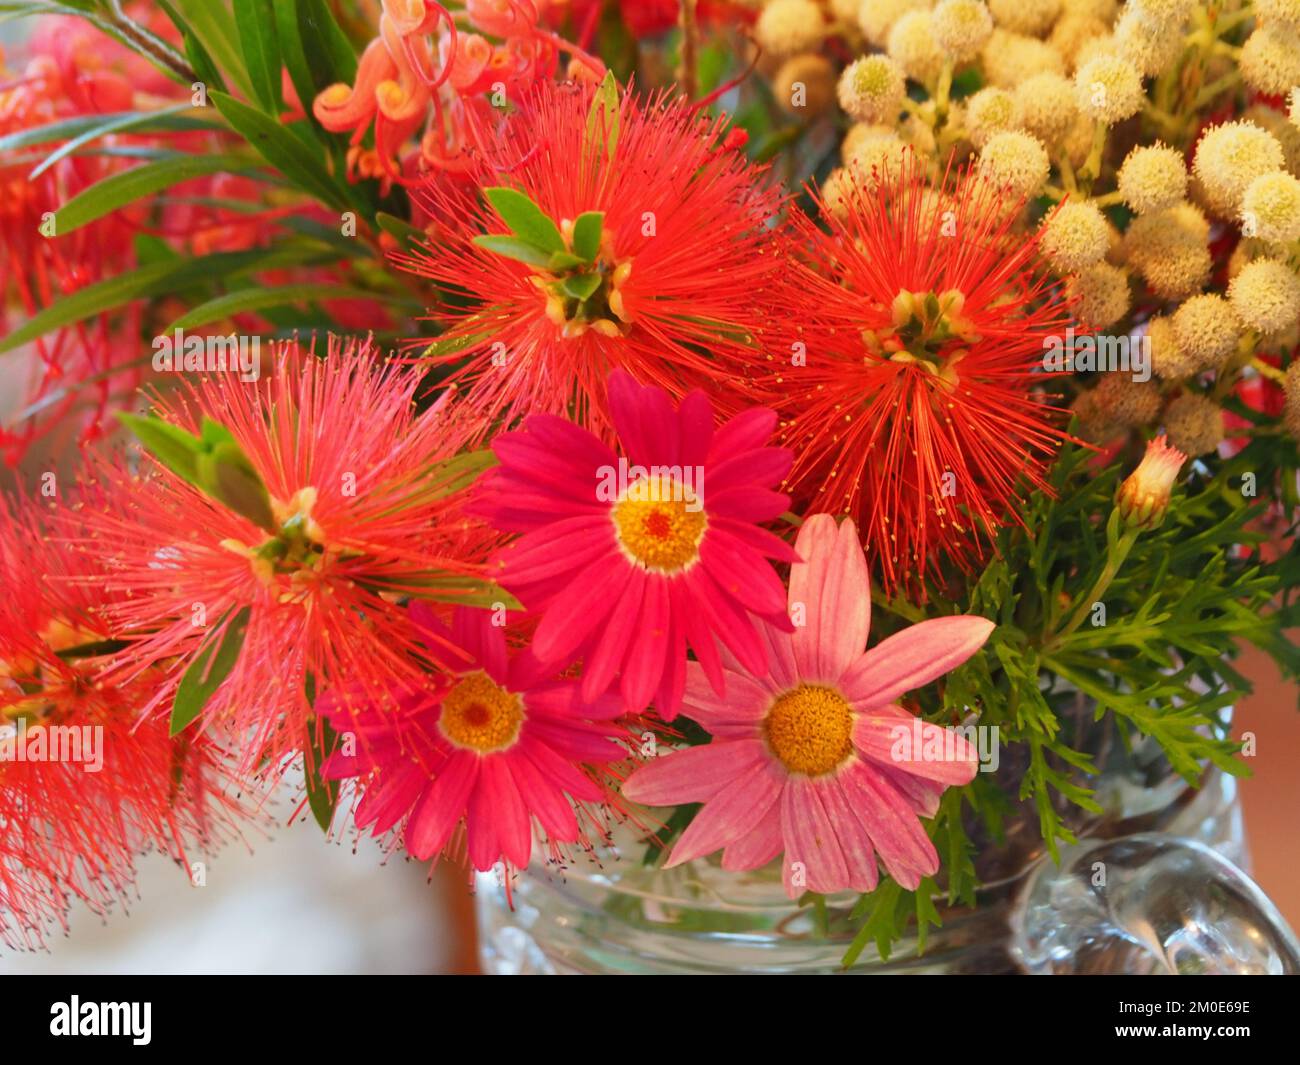 A vase of vibrant bright colourful  flowers, red Bottlebrush and Grevillea, pink daisies, yellow ball-like blooms, green, from Australian Garden Stock Photo